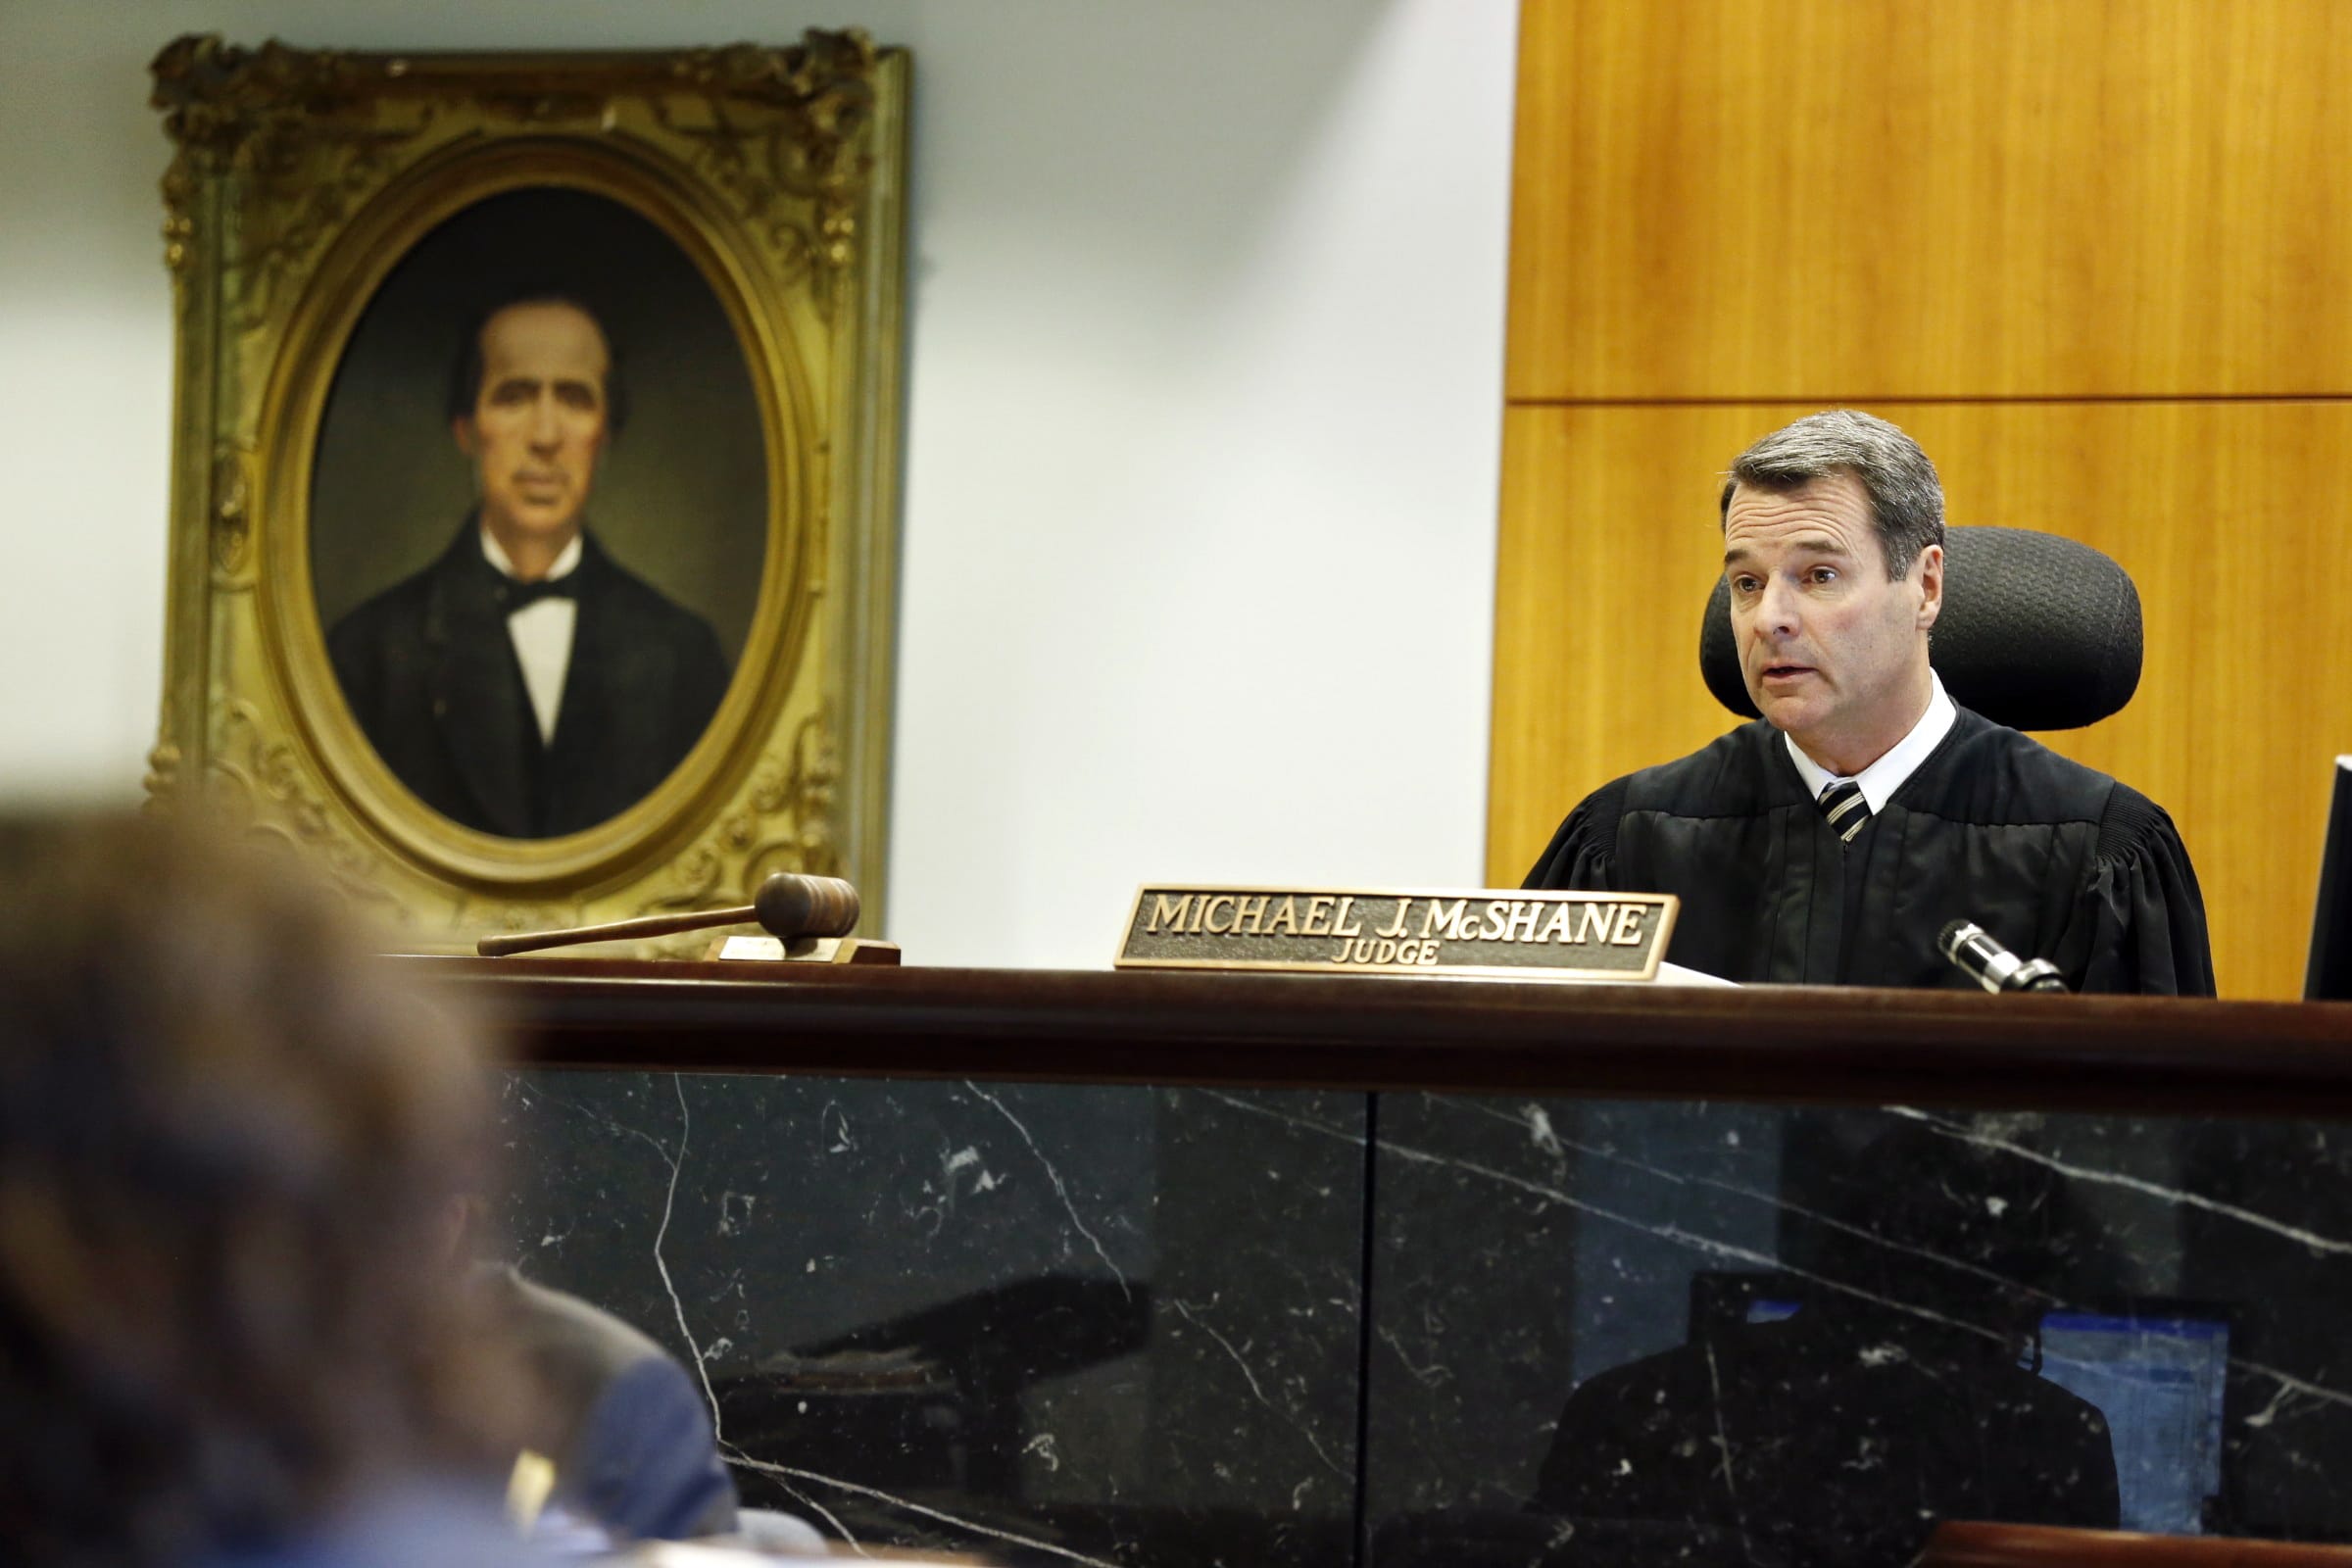 Judge Michael McShane presides over a case  May 20, 2013 at the Multnomah County Courthouse in Portland, Ore.